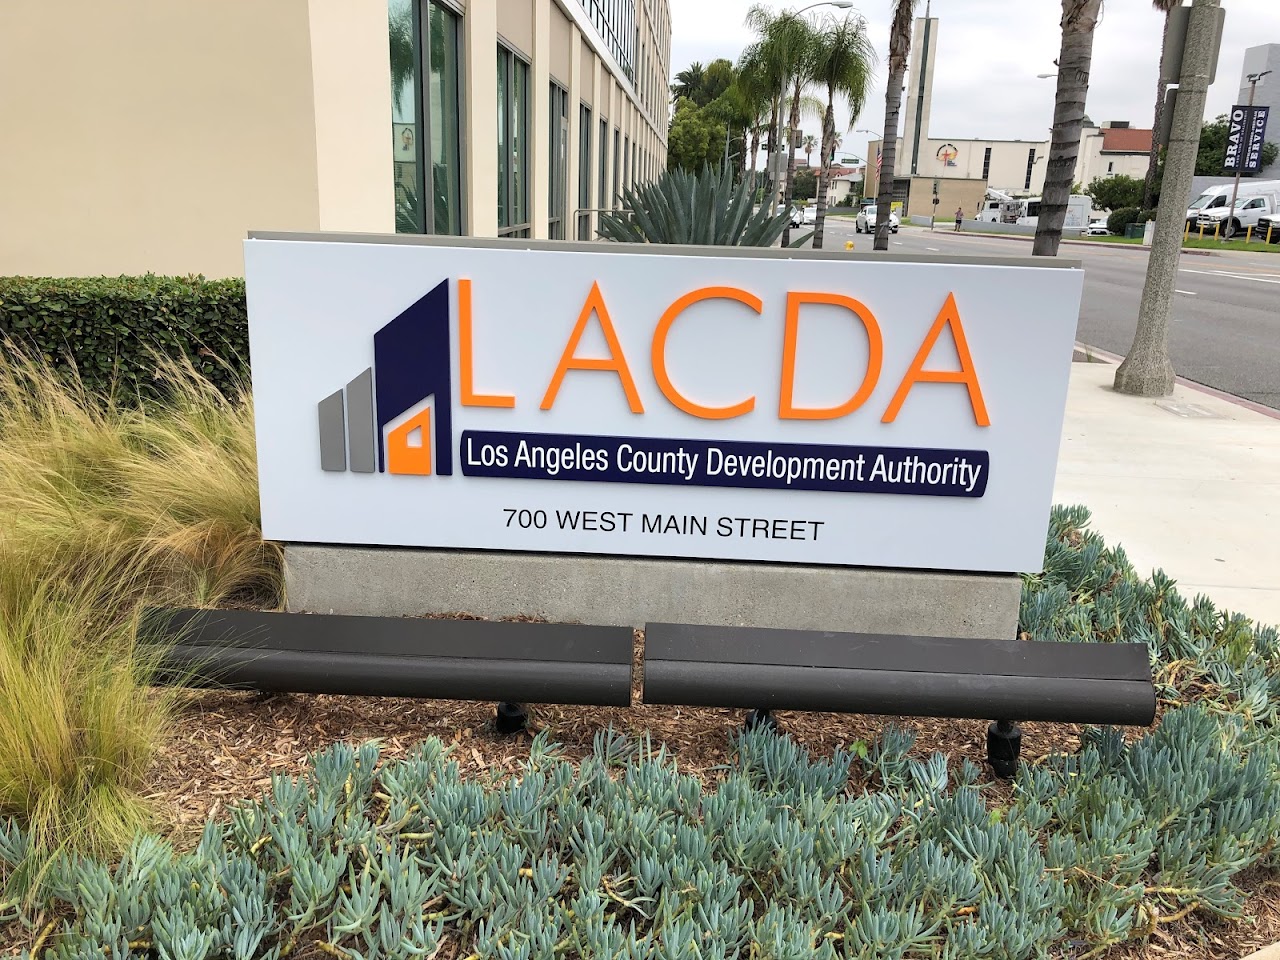 Photo of Los Angeles County Development Authority at 700 W MAIN ST ALHAMBRA, CA 91801